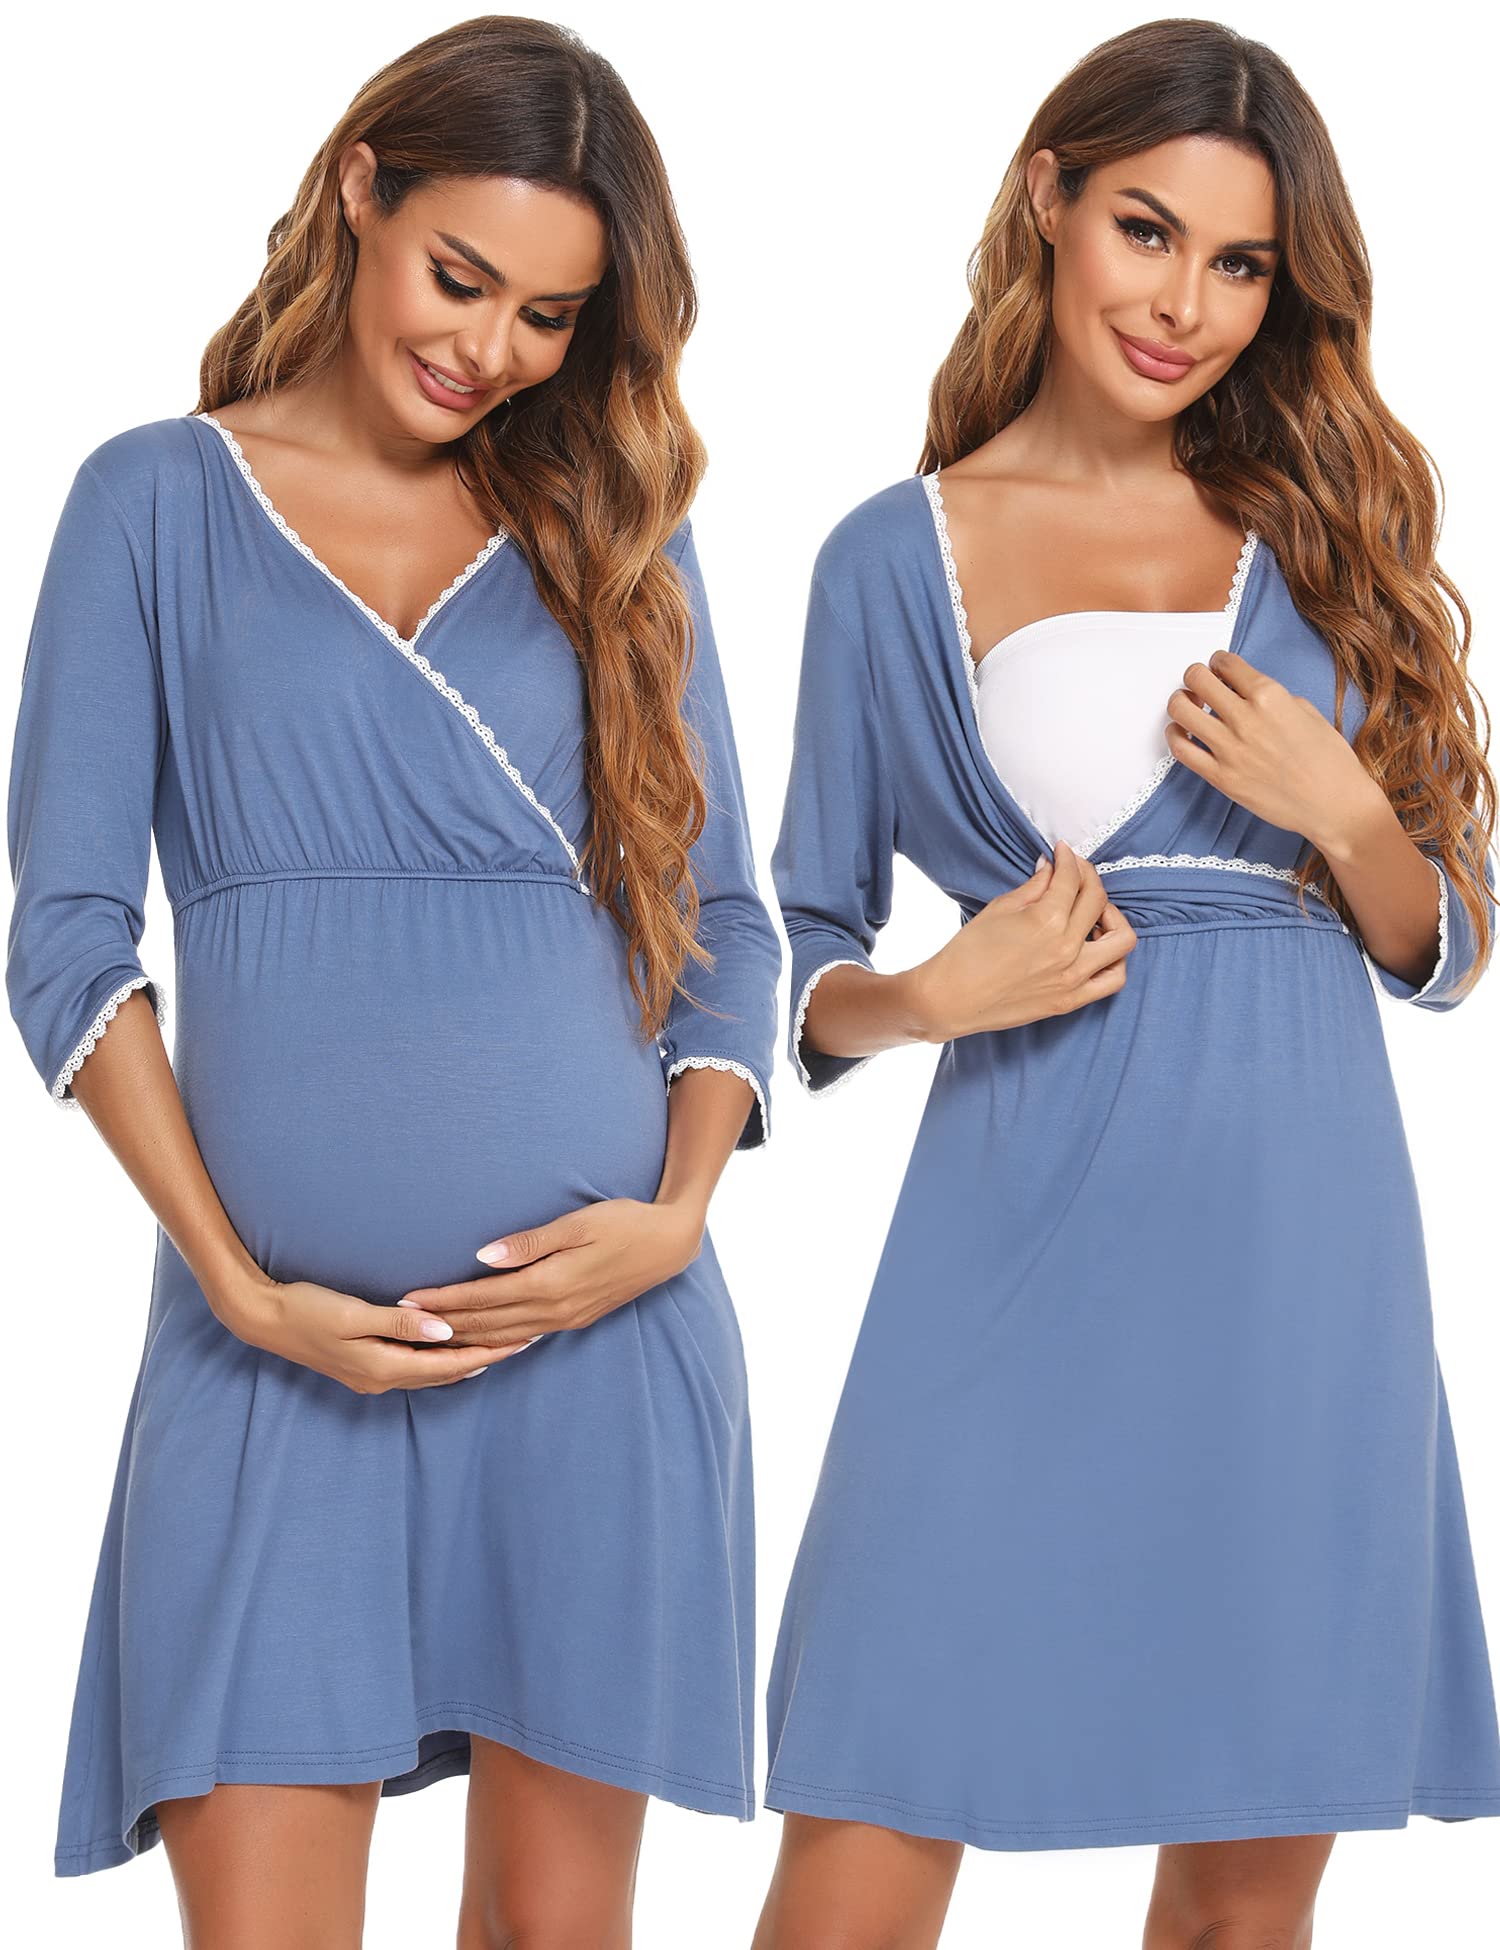 Sykooria Women's Breastfeeding Dress Cotton Soft Nursing Nightdress 3/4  Length Sleeves Maternity Nightdress Labour Nightgown for Hospital and Home  A - Blue M